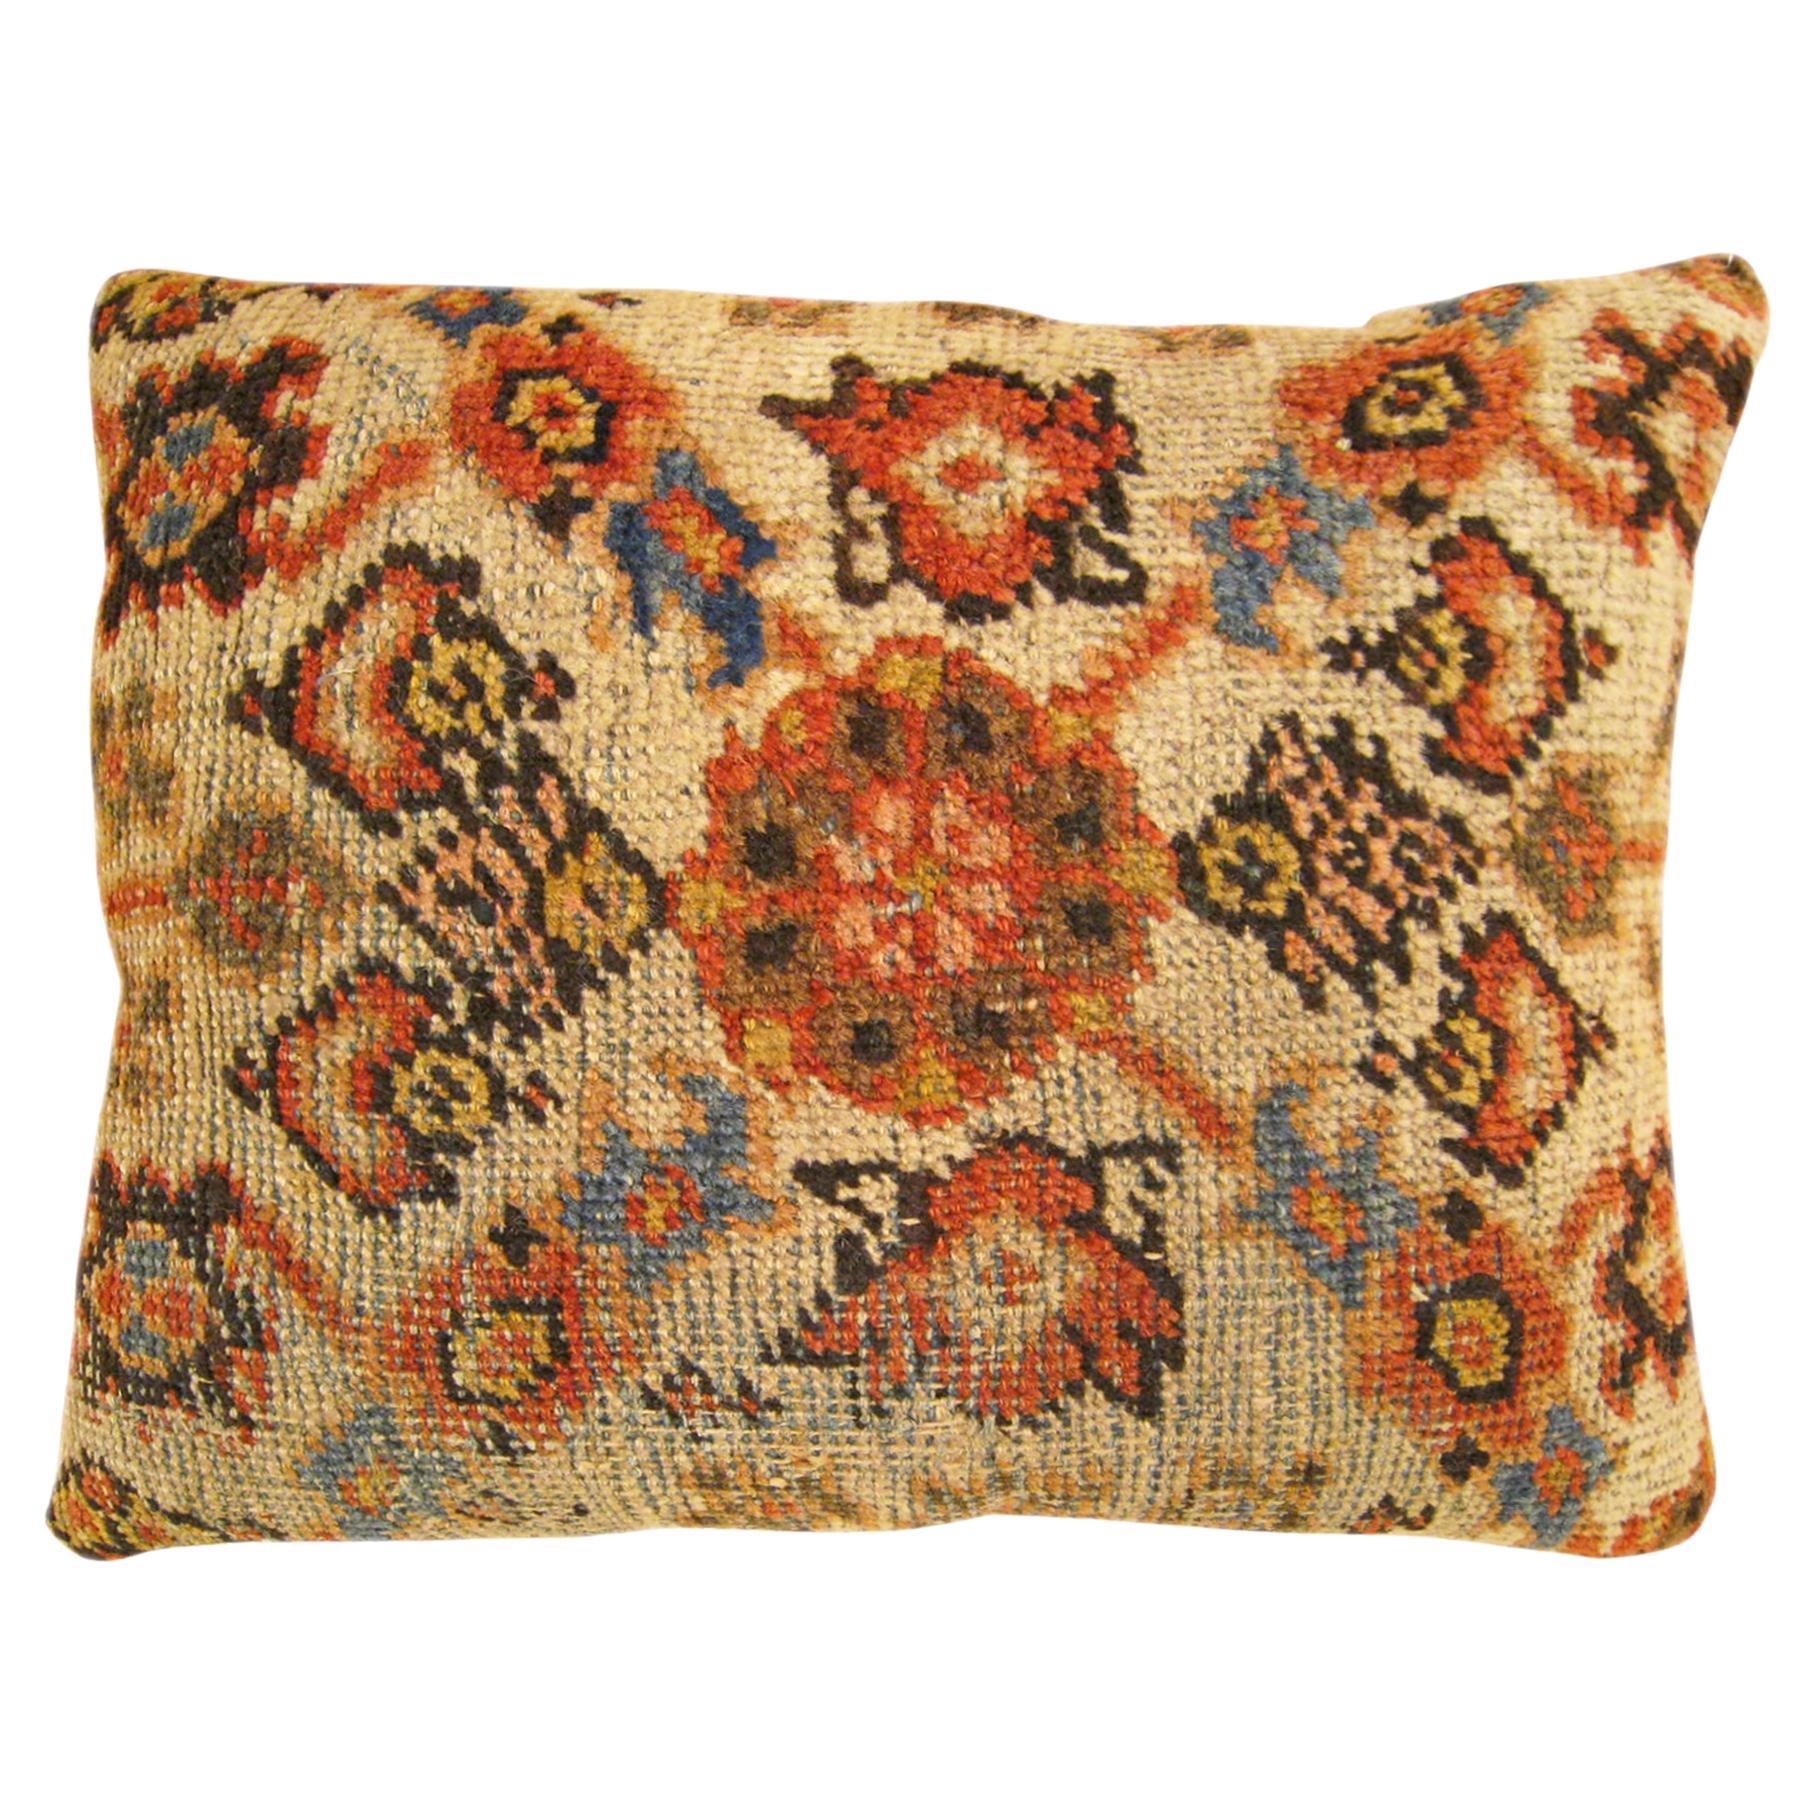  Decorative Antique Persian Sultanabad Pillow with Floral & Geometric Abstracts 